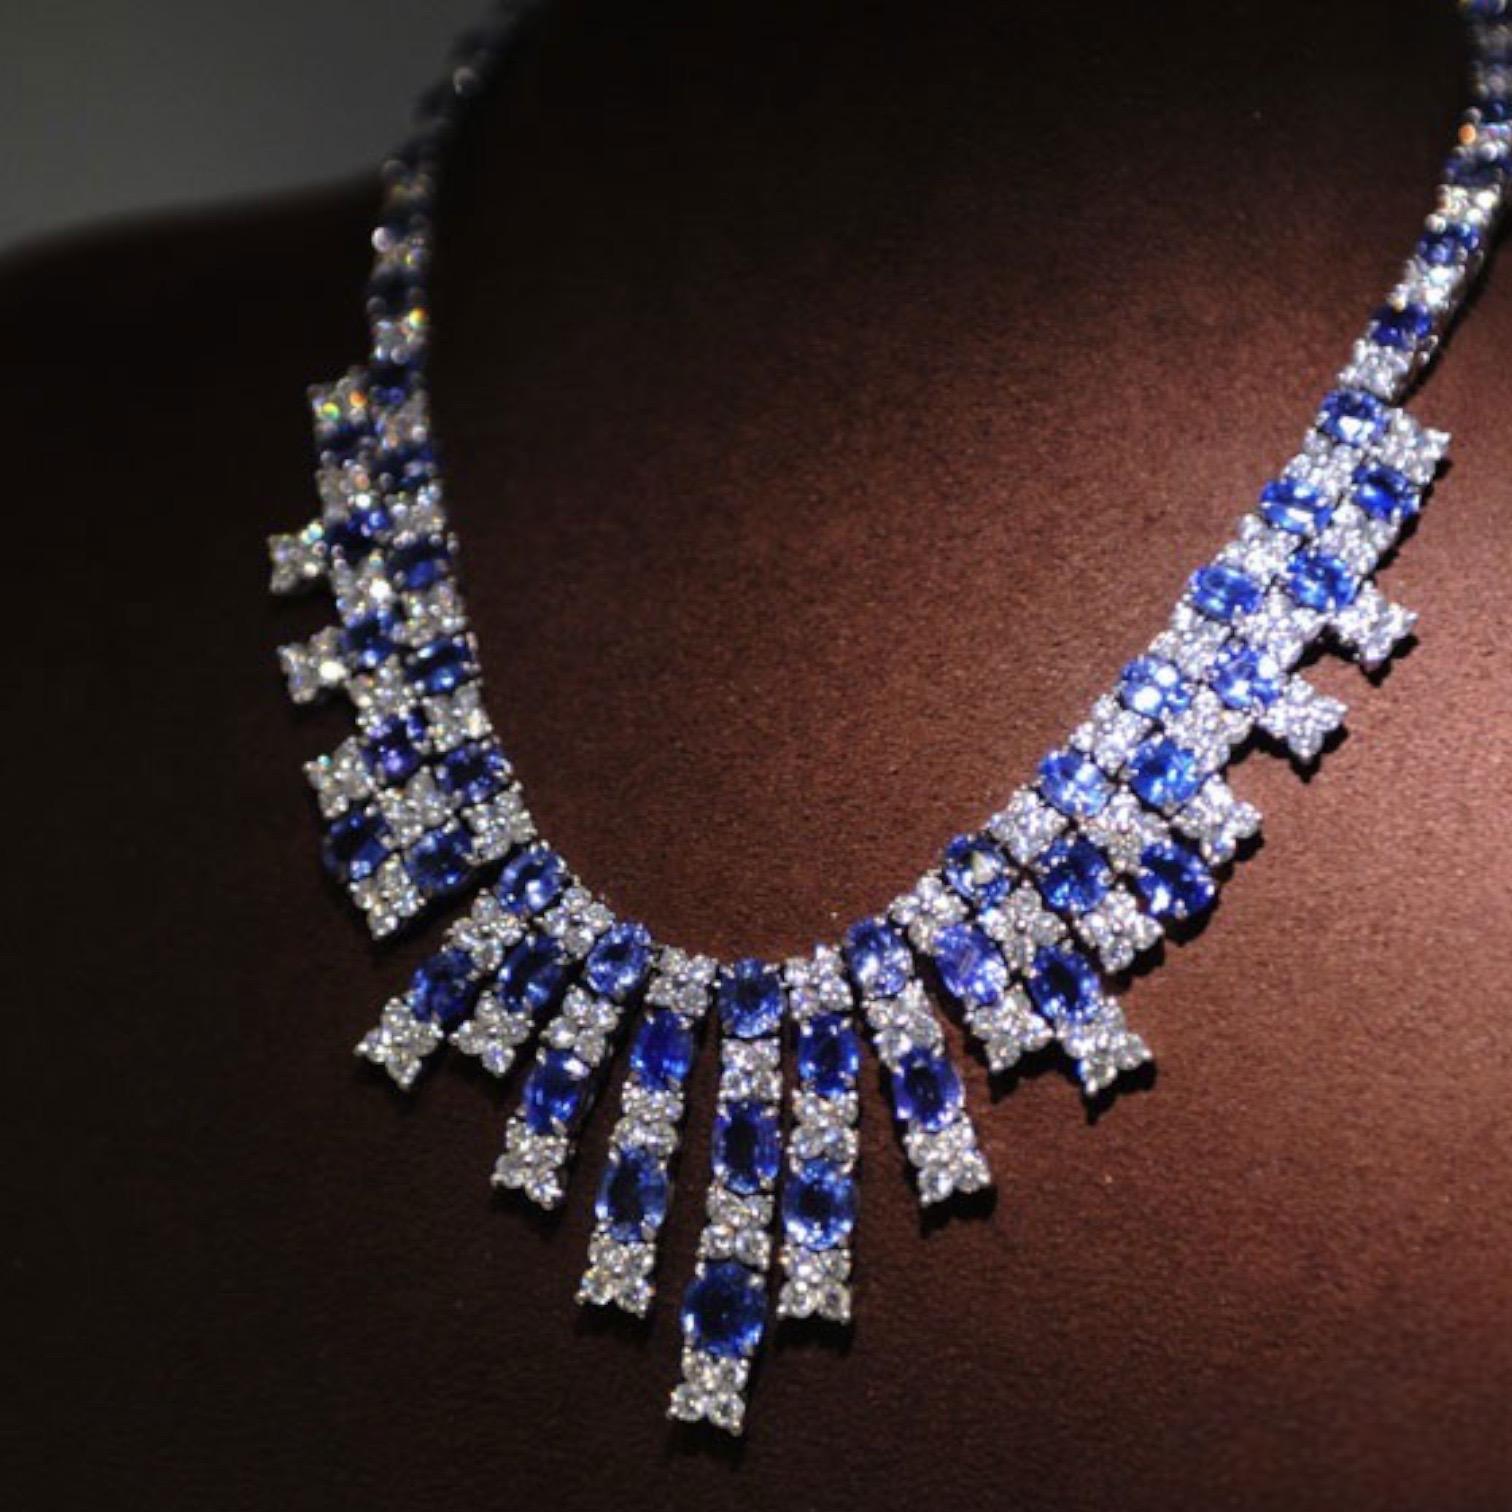 Modern Blue Sapphire Necklace - Oval 89.60 Carat. - 18K White Gold For Sale